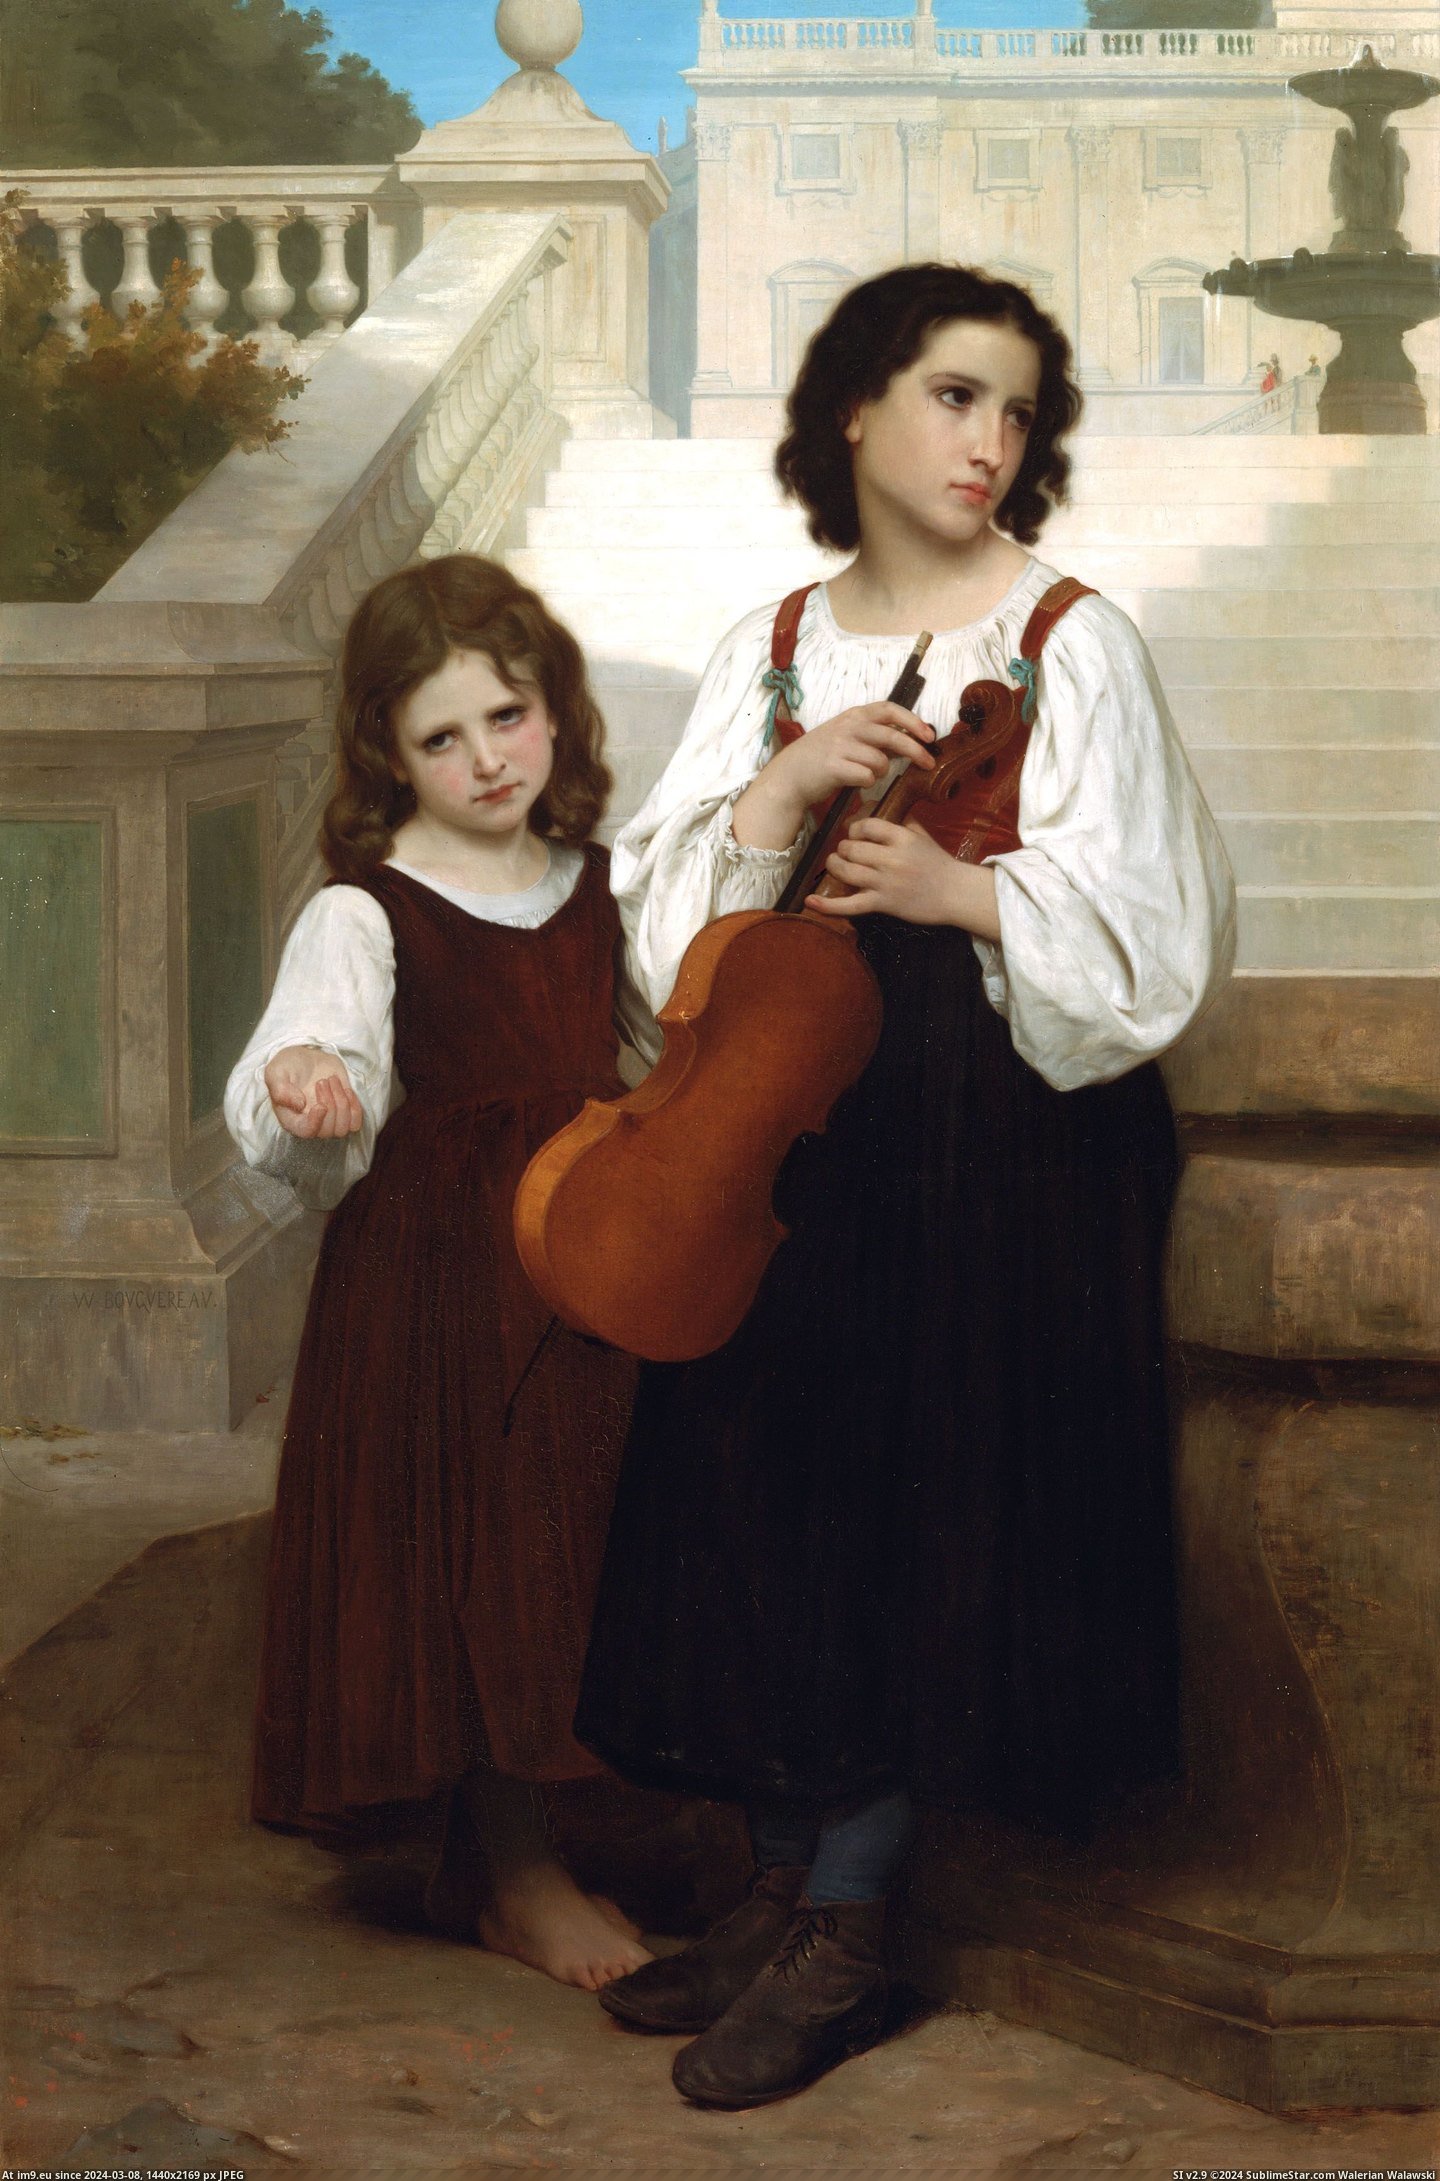 #Art #Painting #Paintings #Pays #Loin #William #Bouguereau #Adolphe (1867) Loin Du Pays - William Adolphe Bouguereau Pic. (Bild von album William Adolphe Bouguereau paintings (1825-1905)))